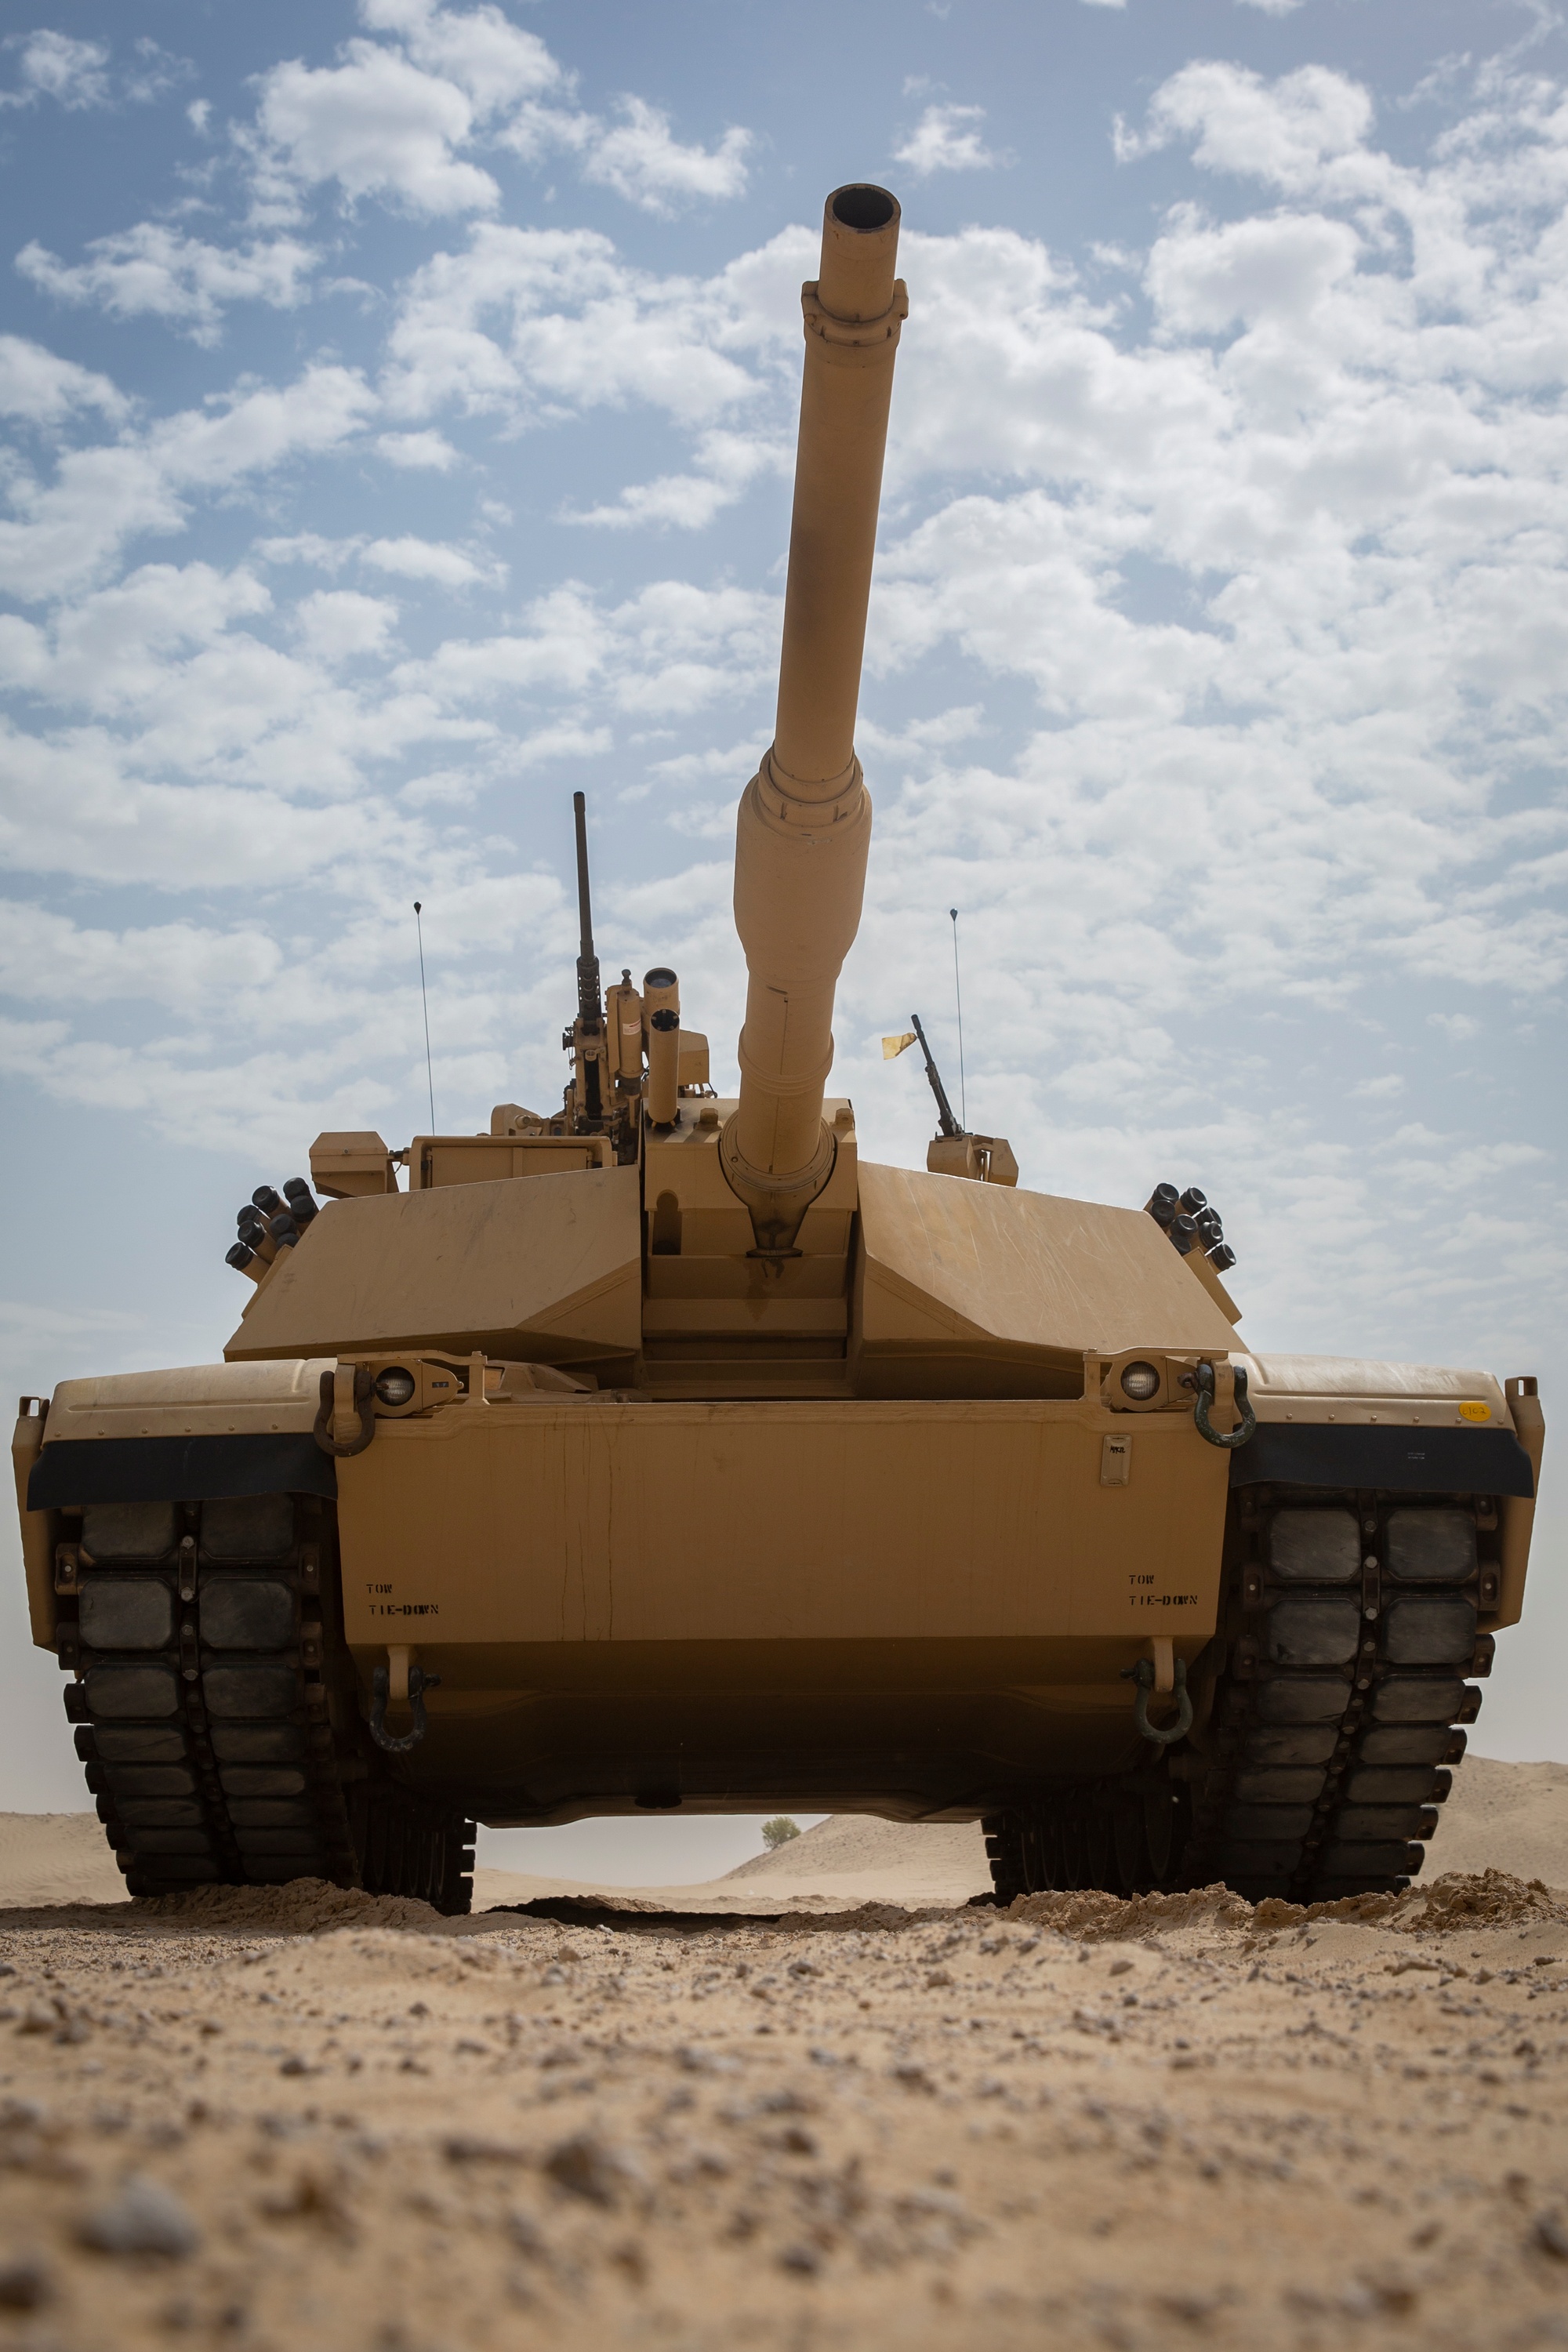 DVIDS - Images . Marines Conduct Live-Fire Training with M1A1 Abrams  Tanks [Image 7 of 9]